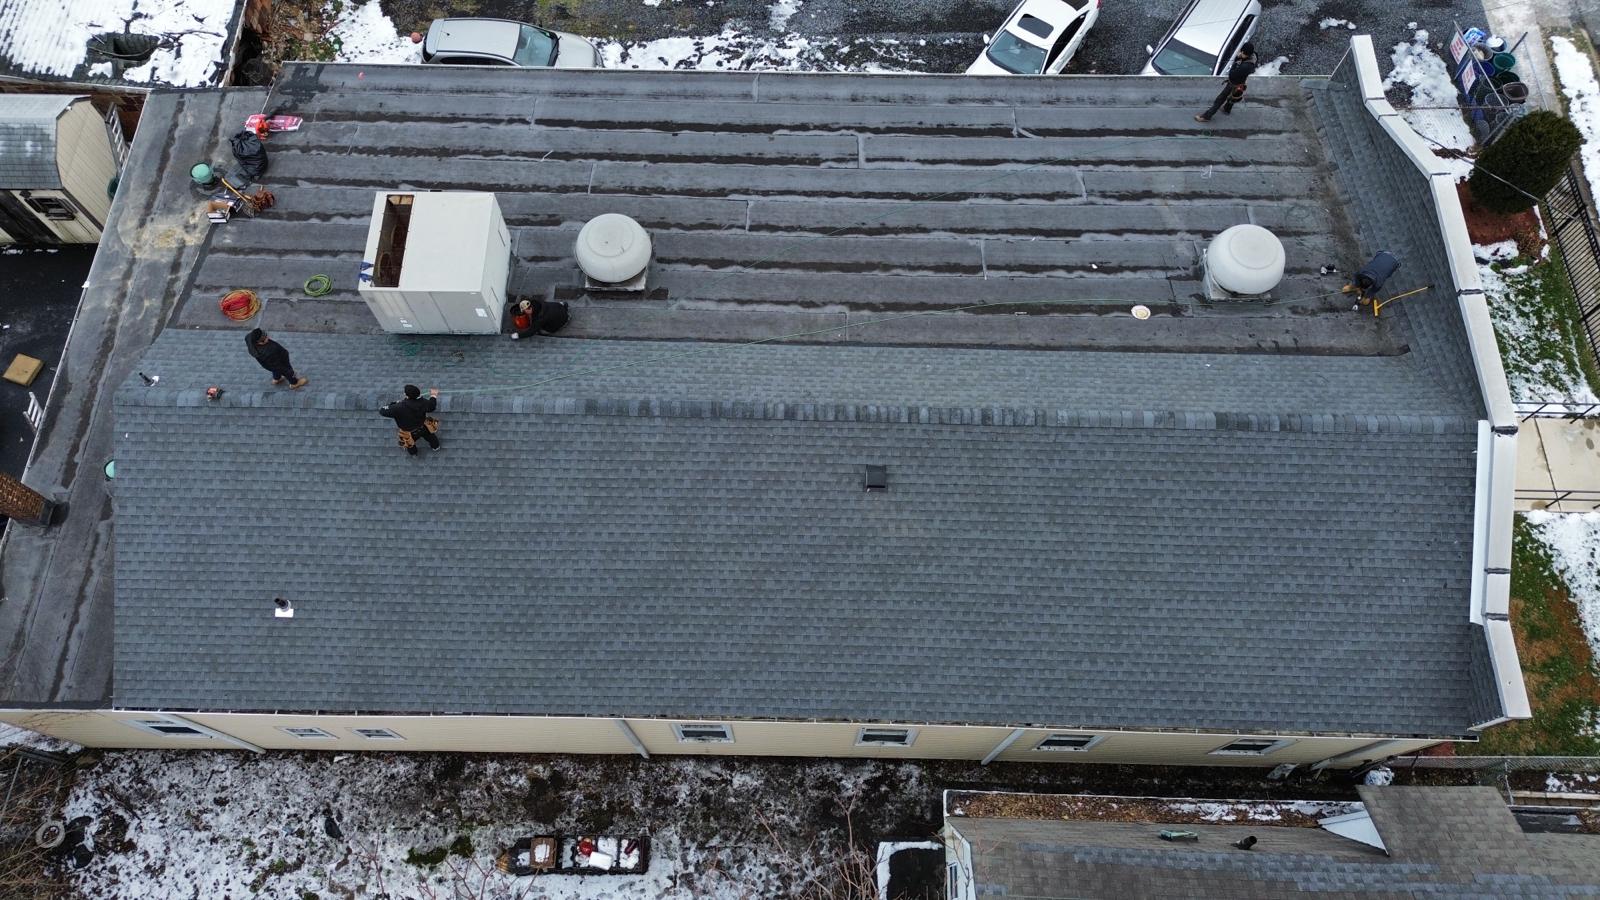 New Roof Installation in Perth Amboy NJ Project Shot 22